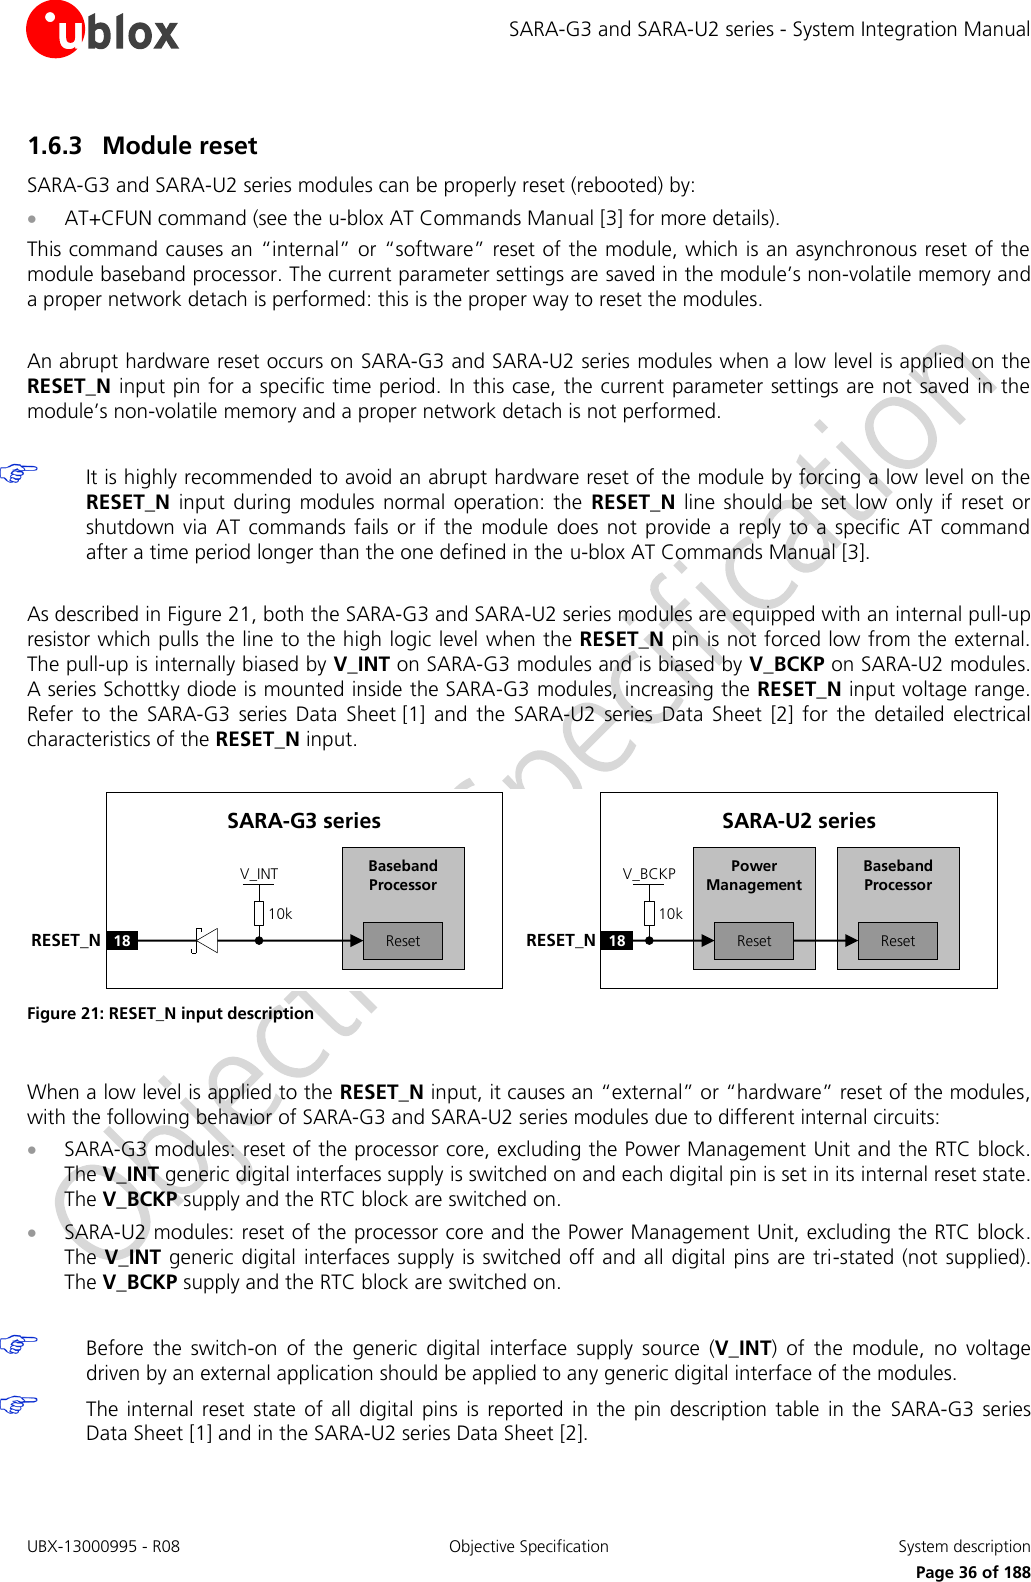 SARA-G3 and SARA-U2 series - System Integration Manual UBX-13000995 - R08  Objective Specification  System description     Page 36 of 188 1.6.3 Module reset SARA-G3 and SARA-U2 series modules can be properly reset (rebooted) by:  AT+CFUN command (see the u-blox AT Commands Manual [3] for more details). This command causes an “internal” or “software” reset of the module, which is an asynchronous reset of the module baseband processor. The current parameter settings are saved in the module’s non-volatile memory and a proper network detach is performed: this is the proper way to reset the modules.  An abrupt hardware reset occurs on SARA-G3 and SARA-U2 series modules when a low level is applied on the RESET_N input pin for a specific time period. In this case, the current parameter settings are not saved in the module’s non-volatile memory and a proper network detach is not performed.   It is highly recommended to avoid an abrupt hardware reset of the module by forcing a low level on the RESET_N  input  during  modules  normal  operation: the  RESET_N  line  should  be  set  low  only if reset  or shutdown  via  AT commands  fails  or  if the  module  does  not  provide  a  reply to a  specific  AT command after a time period longer than the one defined in the u-blox AT Commands Manual [3].  As described in Figure 21, both the SARA-G3 and SARA-U2 series modules are equipped with an internal pull-up resistor which pulls the line to the high logic level  when the RESET_N pin is not forced low from the external. The pull-up is internally biased by V_INT on SARA-G3 modules and is biased by V_BCKP on SARA-U2 modules. A series Schottky diode is mounted inside the SARA-G3 modules, increasing the RESET_N input voltage range. Refer  to  the  SARA-G3  series  Data  Sheet [1]  and  the  SARA-U2  series  Data  Sheet  [2]  for  the  detailed  electrical characteristics of the RESET_N input.  Baseband Processor18RESET_NSARA-U2 seriesResetPower ManagementReset10kV_BCKPBaseband Processor18RESET_NSARA-G3 seriesReset10kV_INT Figure 21: RESET_N input description  When a low level is applied to the RESET_N input, it causes an “external” or “hardware” reset of the modules, with the following behavior of SARA-G3 and SARA-U2 series modules due to different internal circuits:  SARA-G3 modules: reset of the processor core, excluding the Power Management Unit and the RTC block. The V_INT generic digital interfaces supply is switched on and each digital pin is set in its internal reset state. The V_BCKP supply and the RTC block are switched on.  SARA-U2 modules: reset of the processor core and the Power Management Unit, excluding the RTC block. The V_INT generic digital interfaces supply is switched off and all digital pins are tri-stated (not supplied). The V_BCKP supply and the RTC block are switched on.   Before  the  switch-on  of  the  generic  digital  interface  supply  source  (V_INT)  of  the  module,  no  voltage driven by an external application should be applied to any generic digital interface of the modules.  The  internal reset  state  of all digital  pins  is reported  in the  pin  description  table  in the  SARA-G3  series Data Sheet [1] and in the SARA-U2 series Data Sheet [2].  